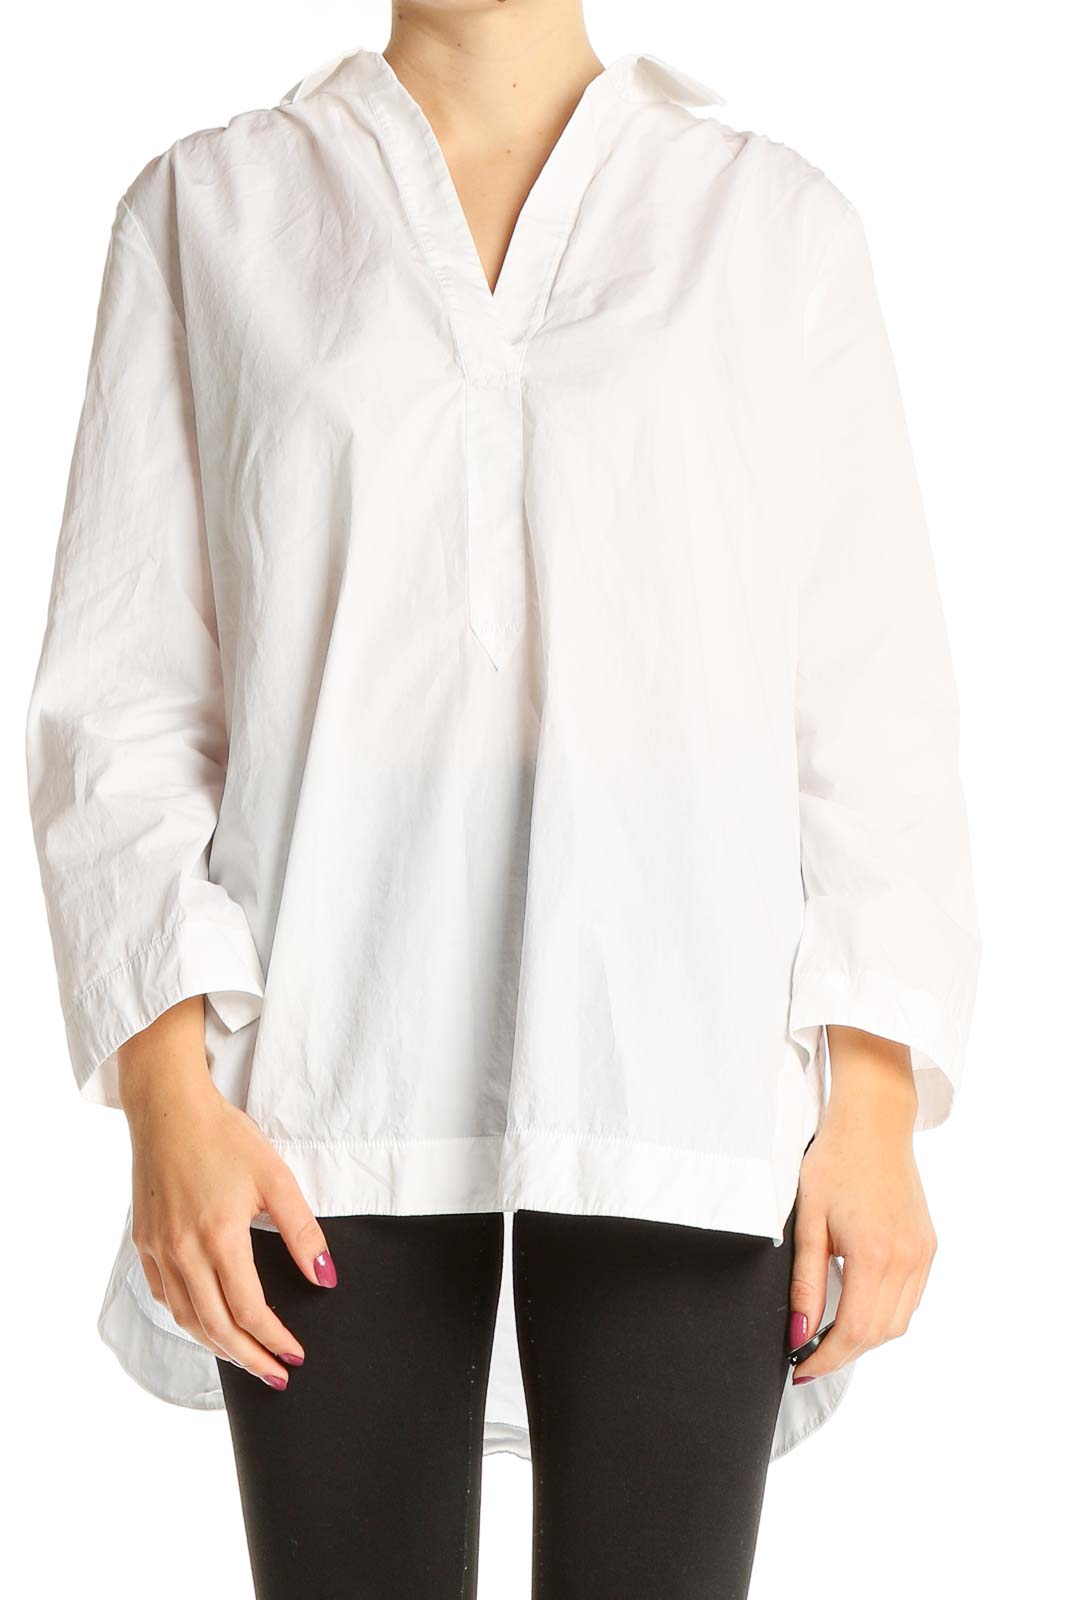 White Formal Top Front